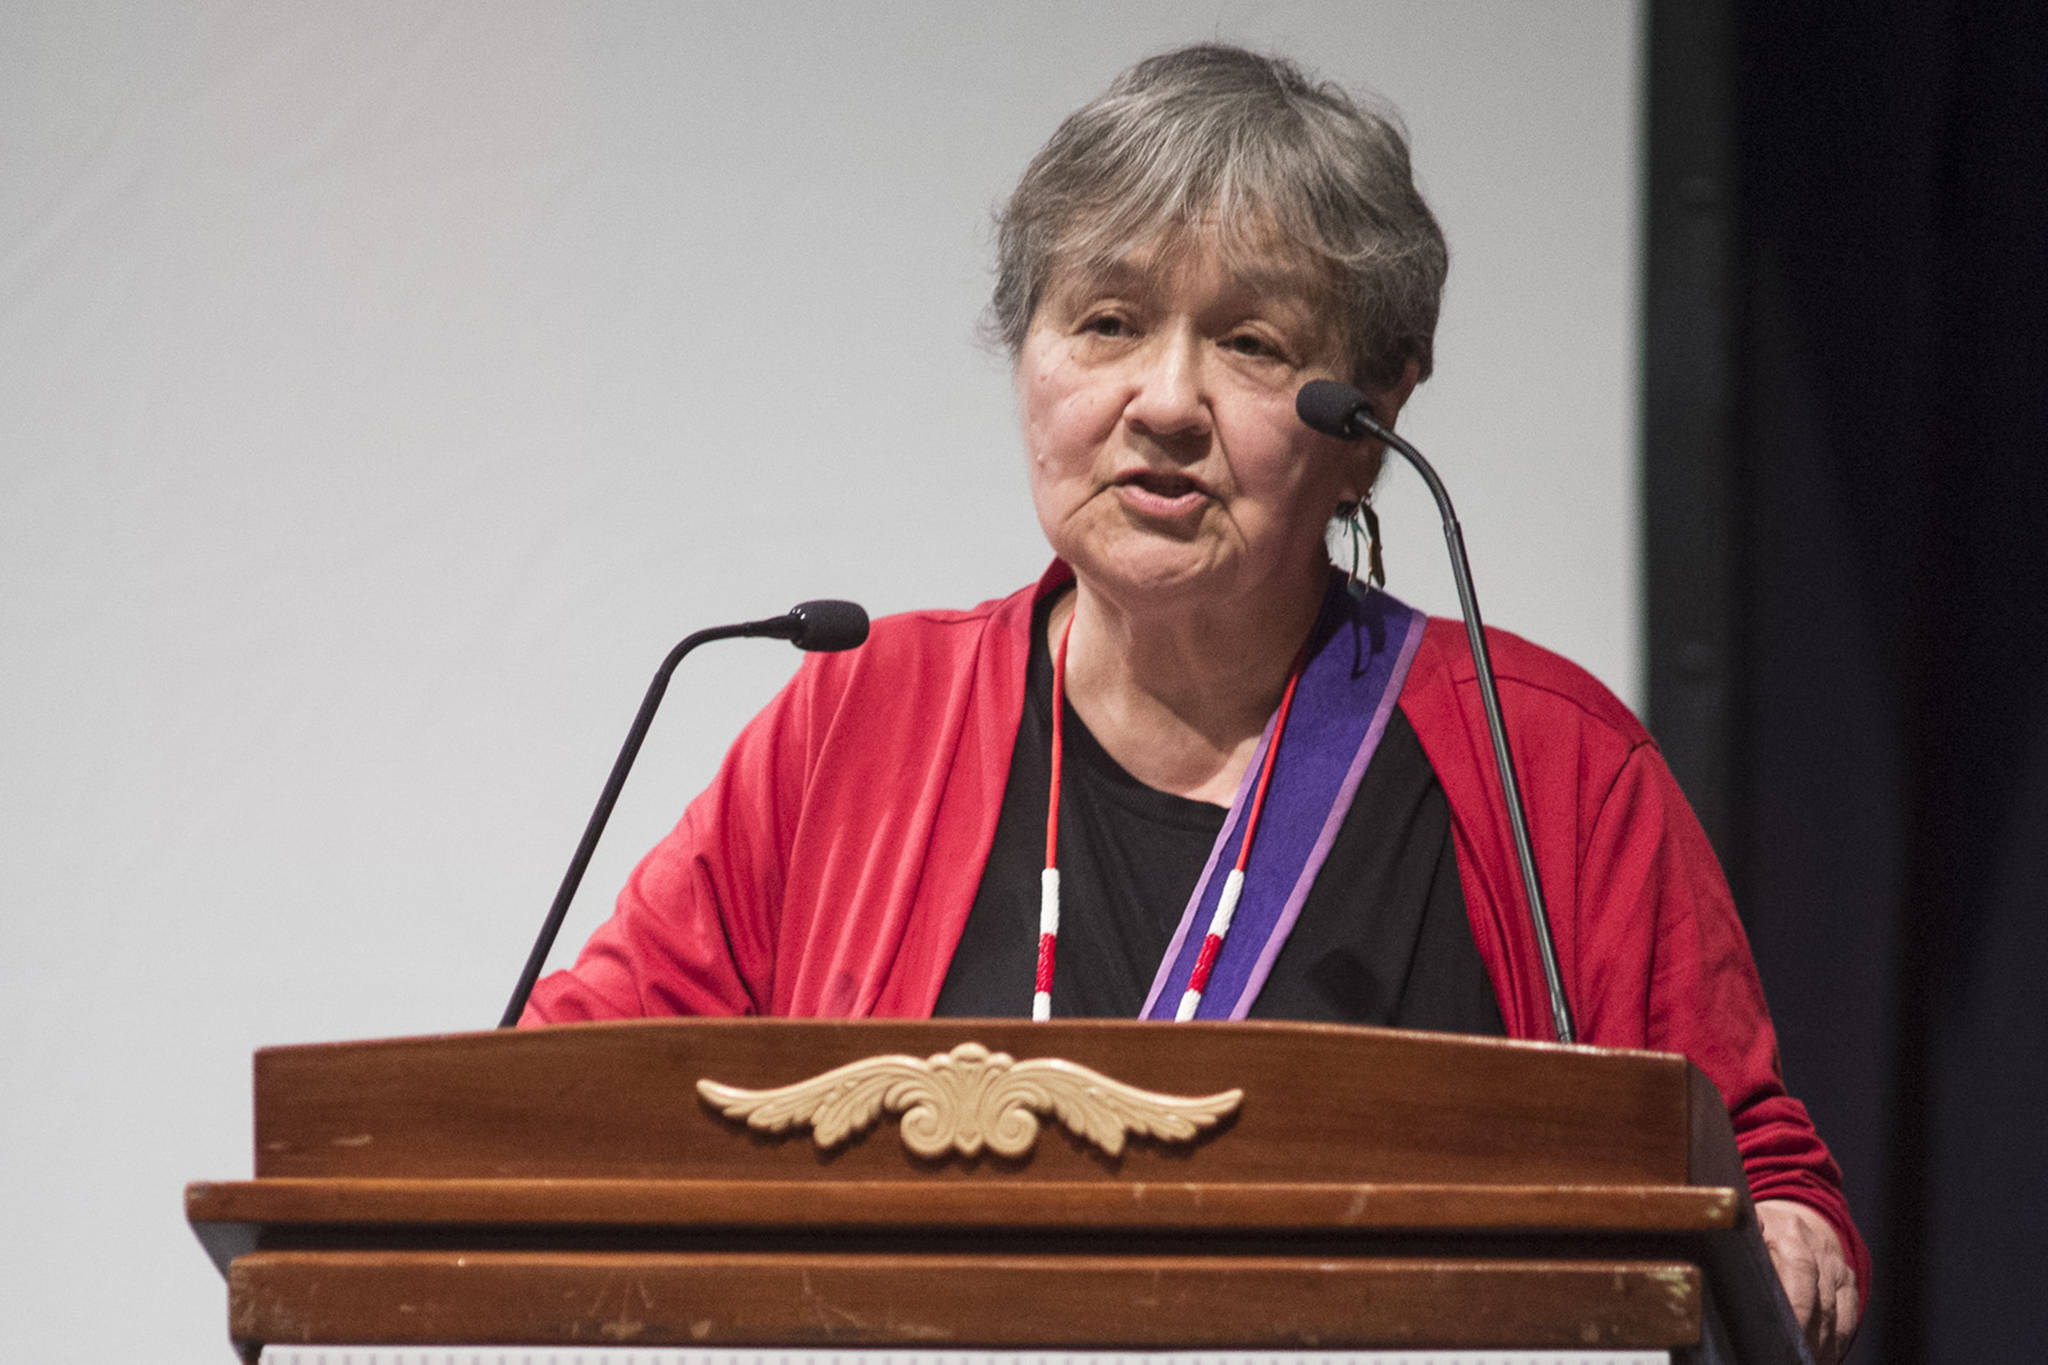 Ernestine Hayes, Alaska State Writer Laureate, makes closing remarks at the 2019 Governor’s Arts & Hunanities Awards at the Juneau Arts & Culture Center on Thursday, Feb. 7, 2019. (Michael Penn | Juneau Empire)